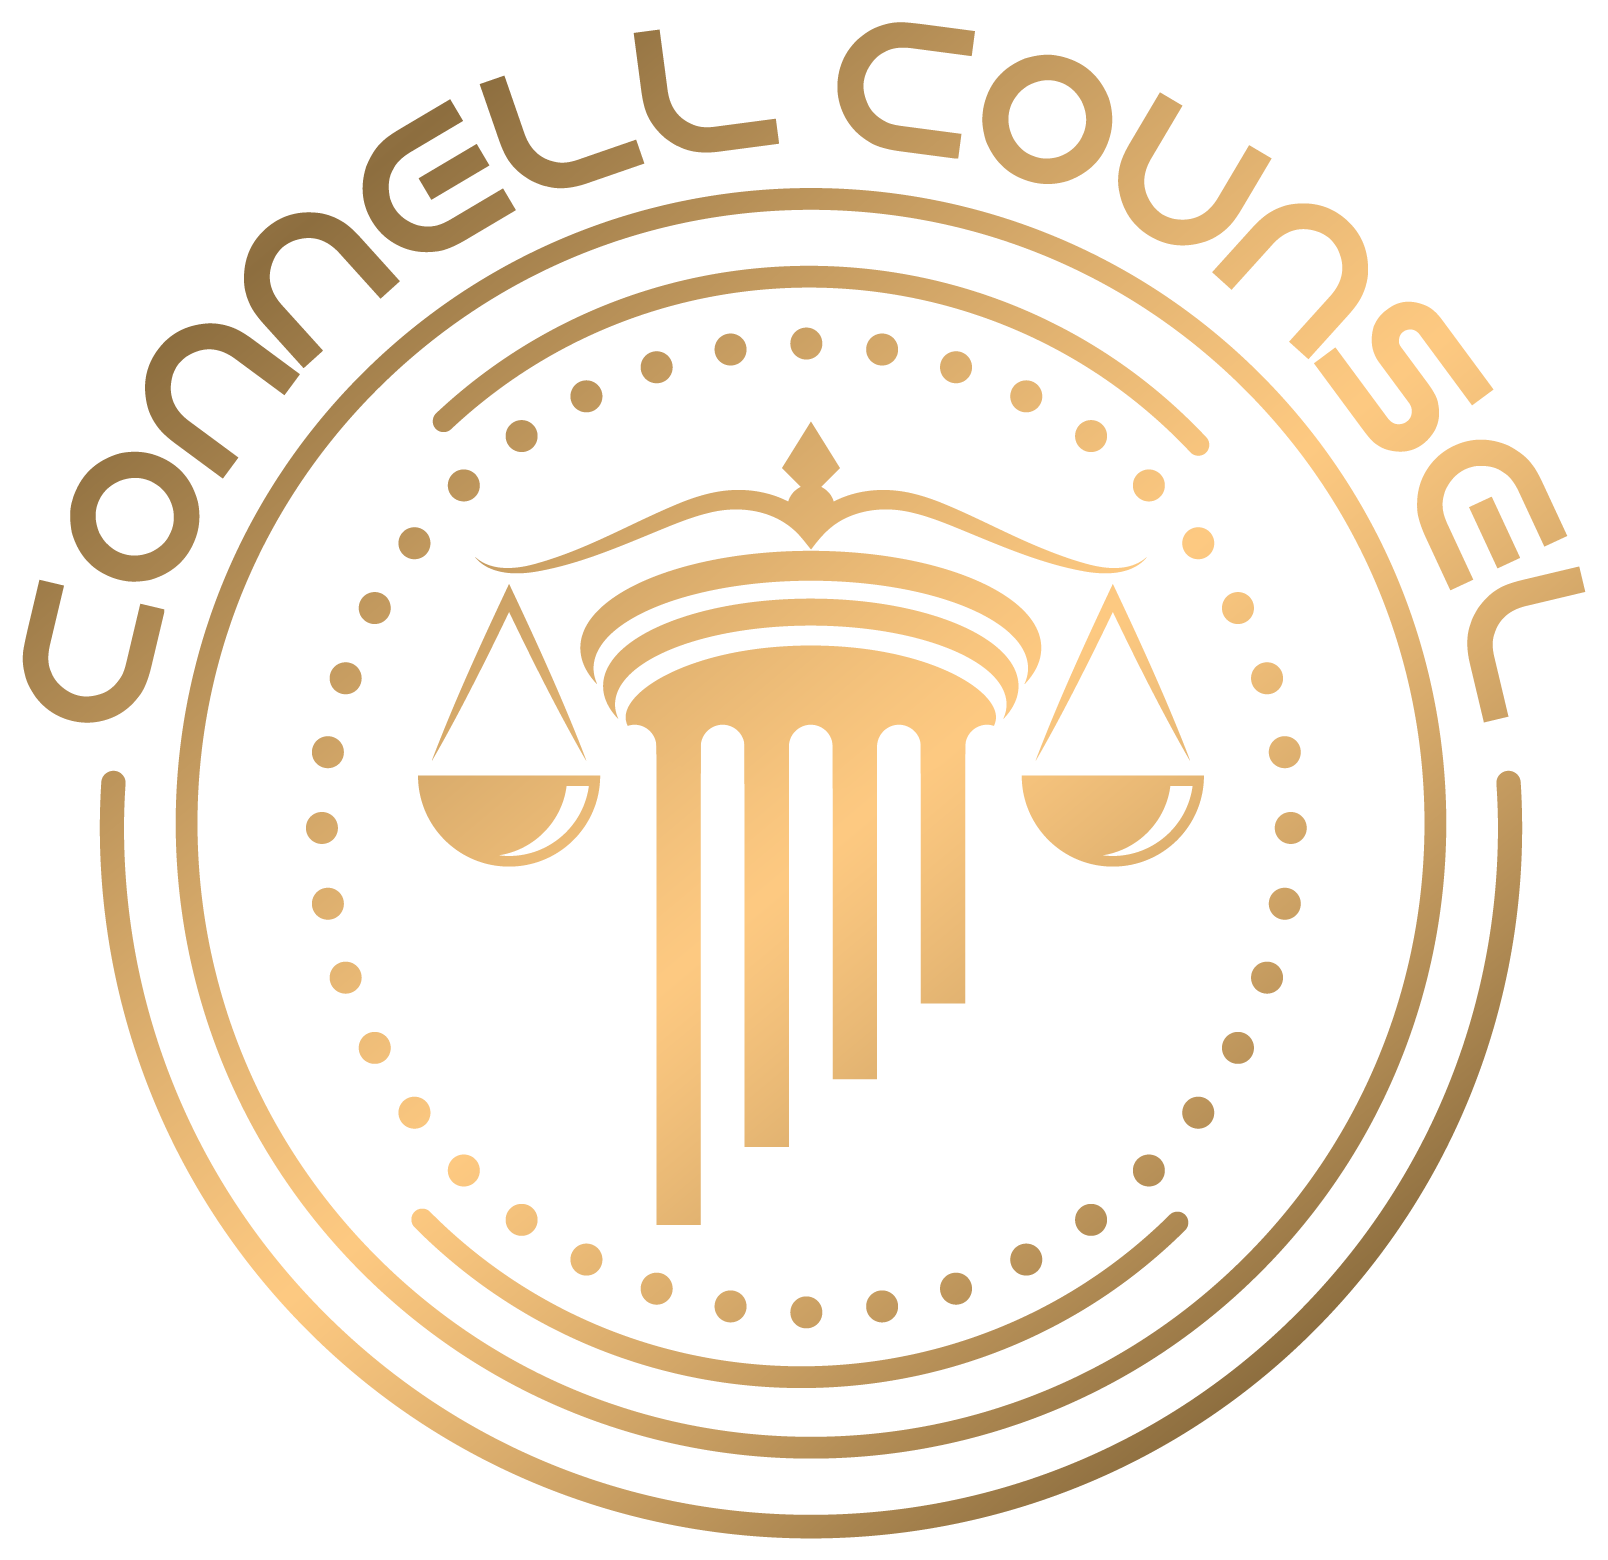 Connel Counsell